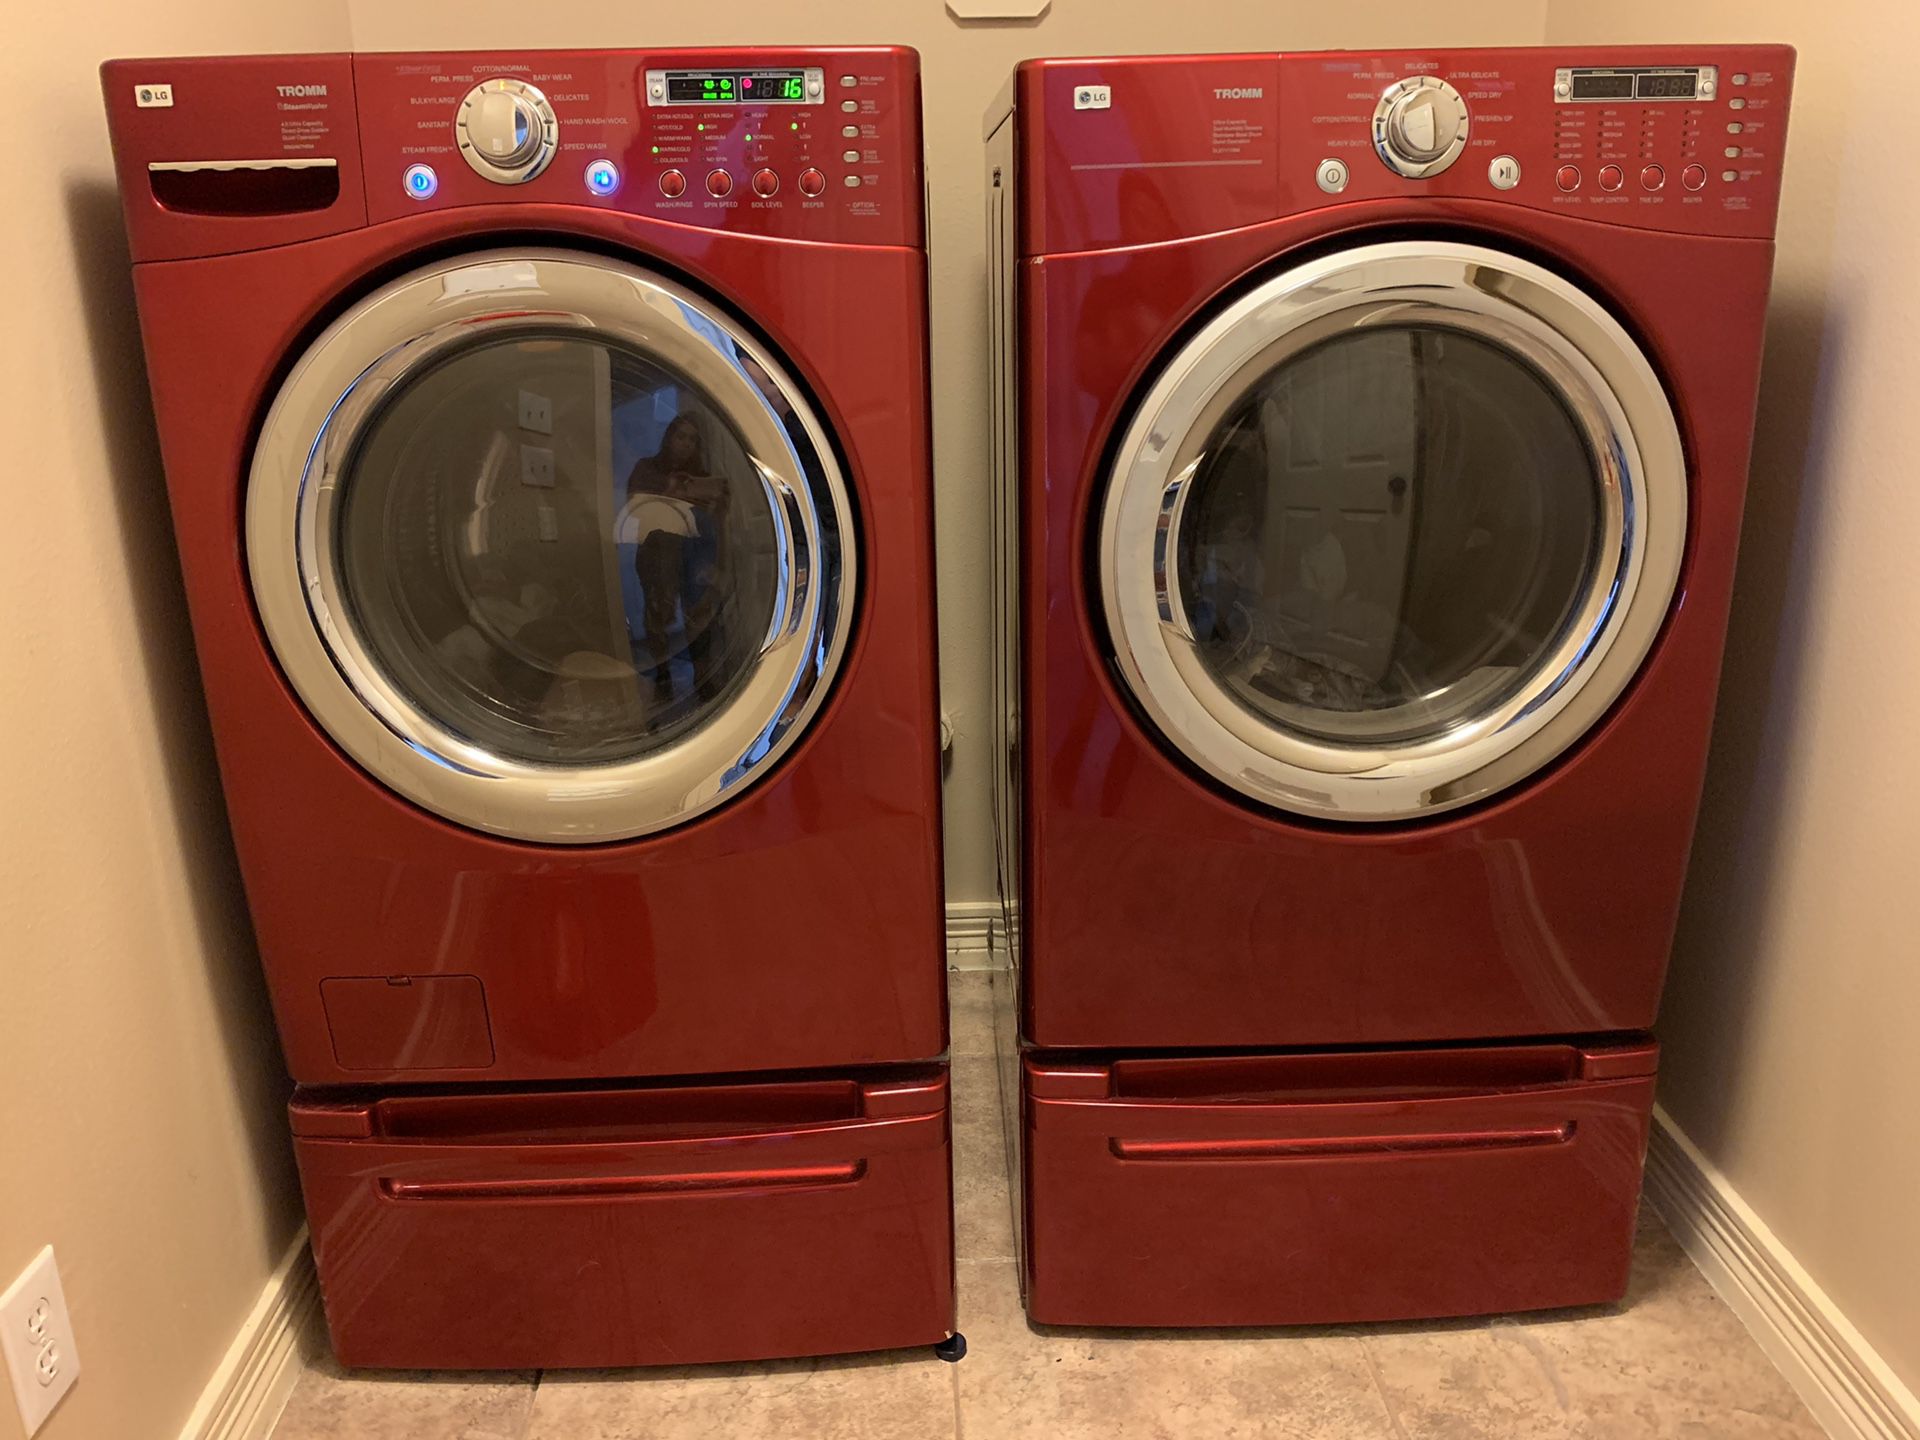 LG washer and dryer with pedestal.